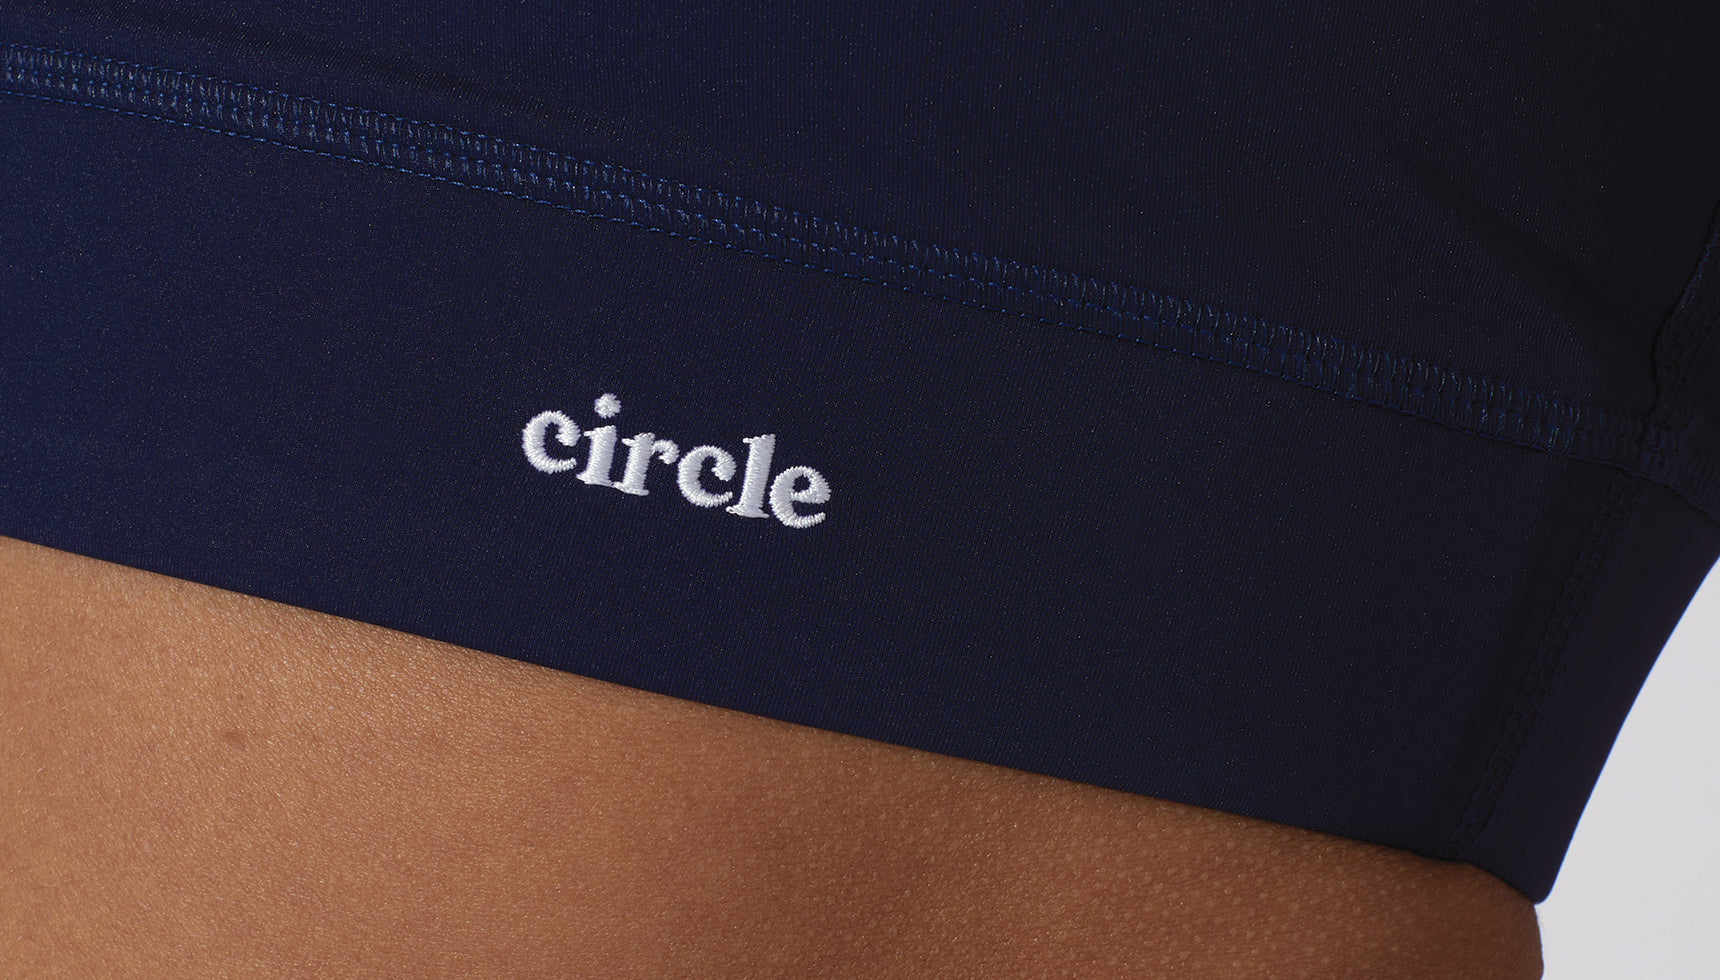 Clean design, with the iconic Circle embroidery made with white thread 